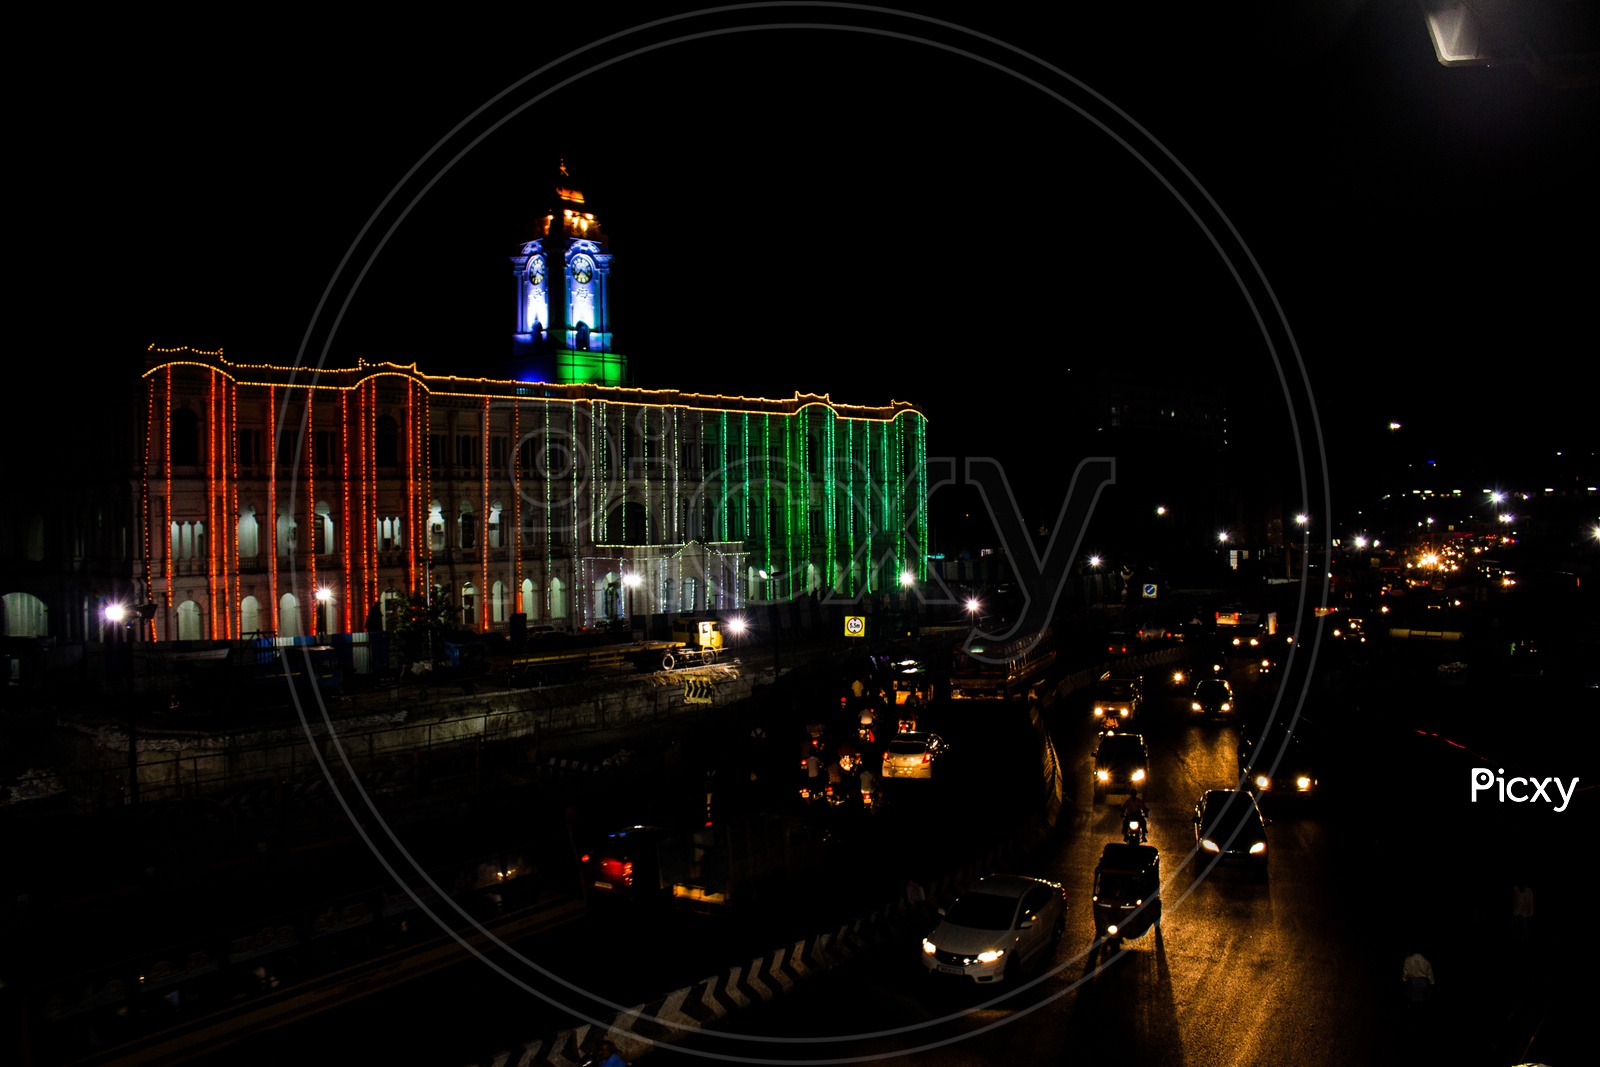 Night View of Chennai Central Railway Station